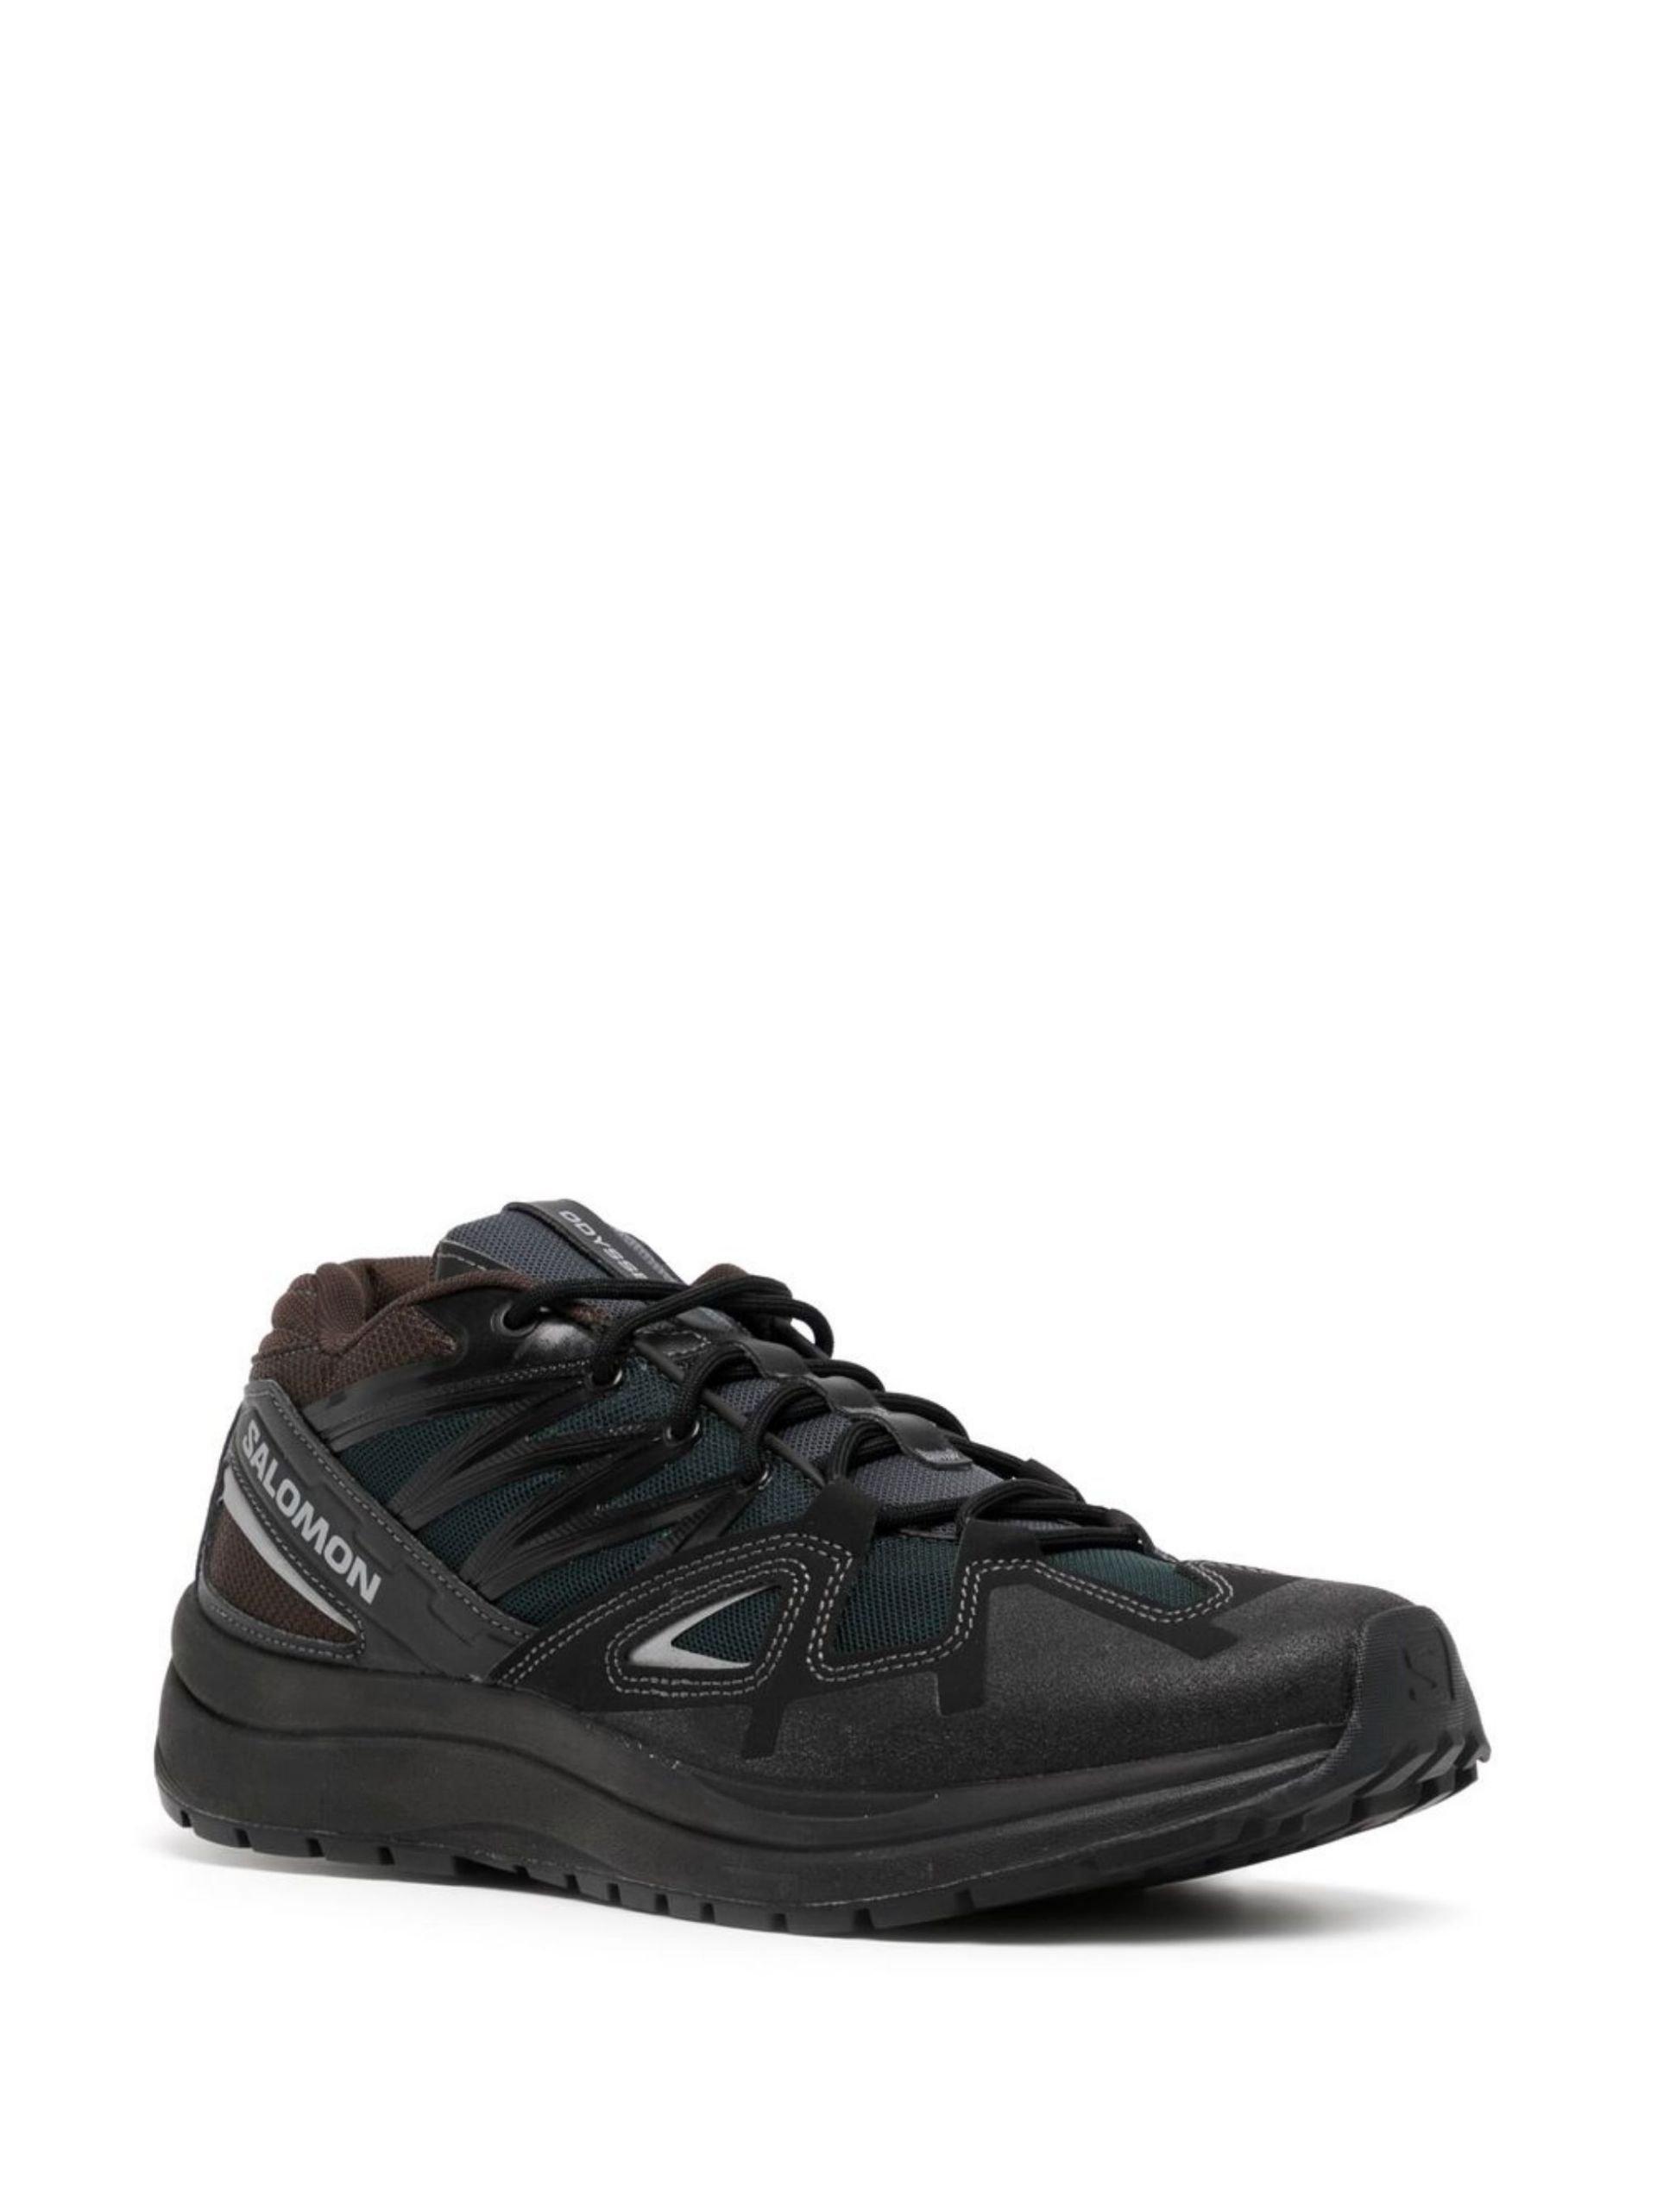 and wander X Salomon S/lab Odyssey Low-top Sneakers in Black for Men | Lyst